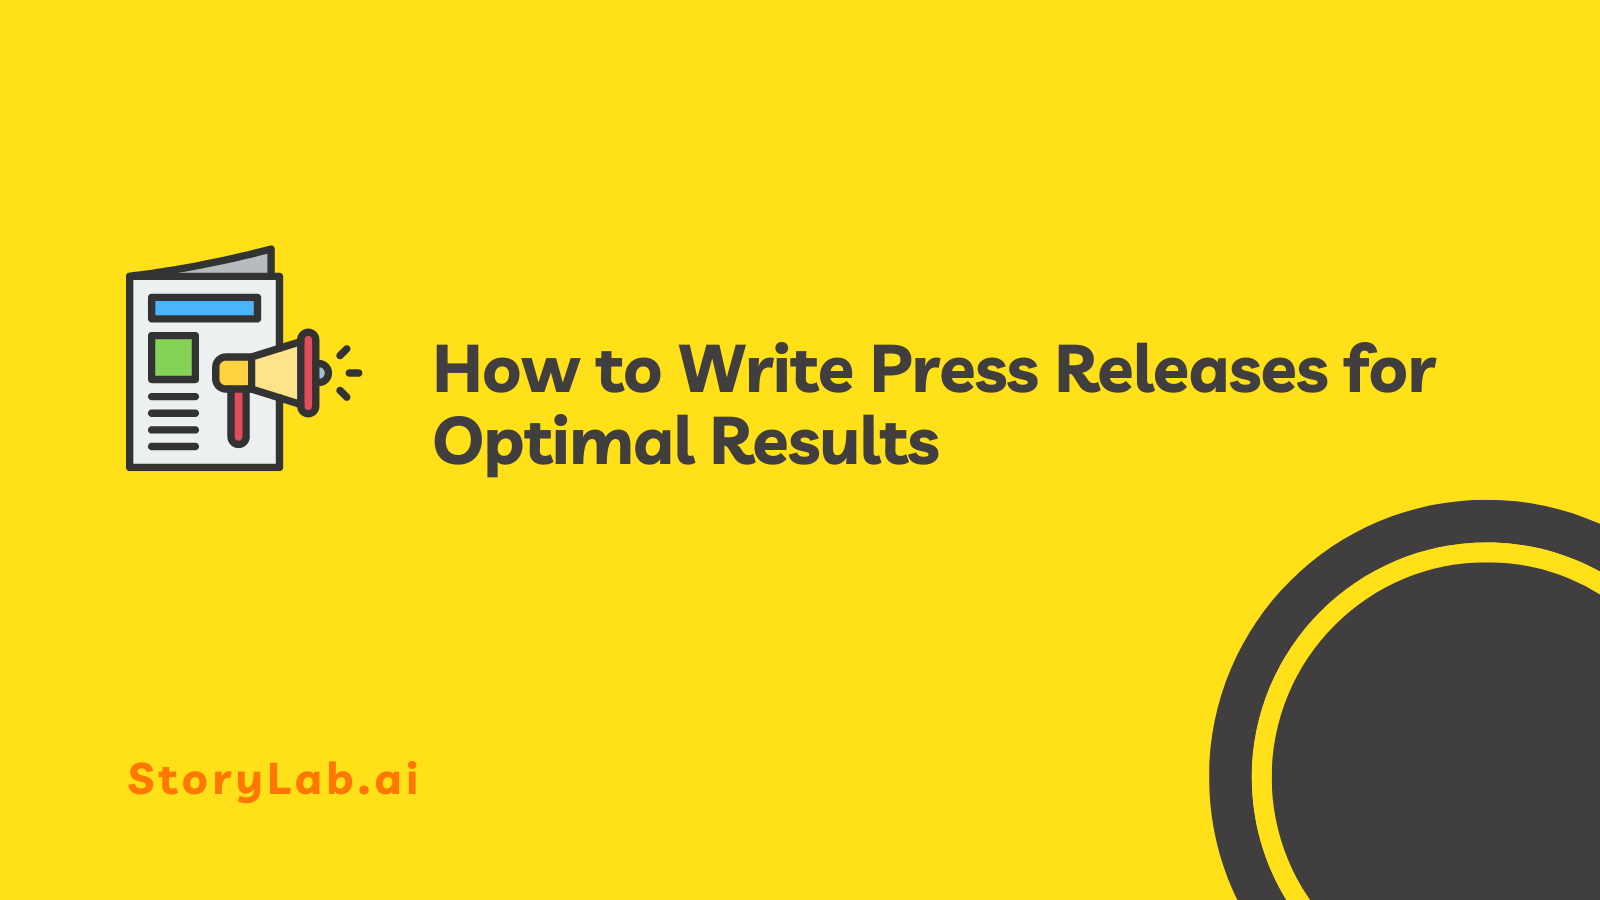 How to Write Press Releases for Optimal Results